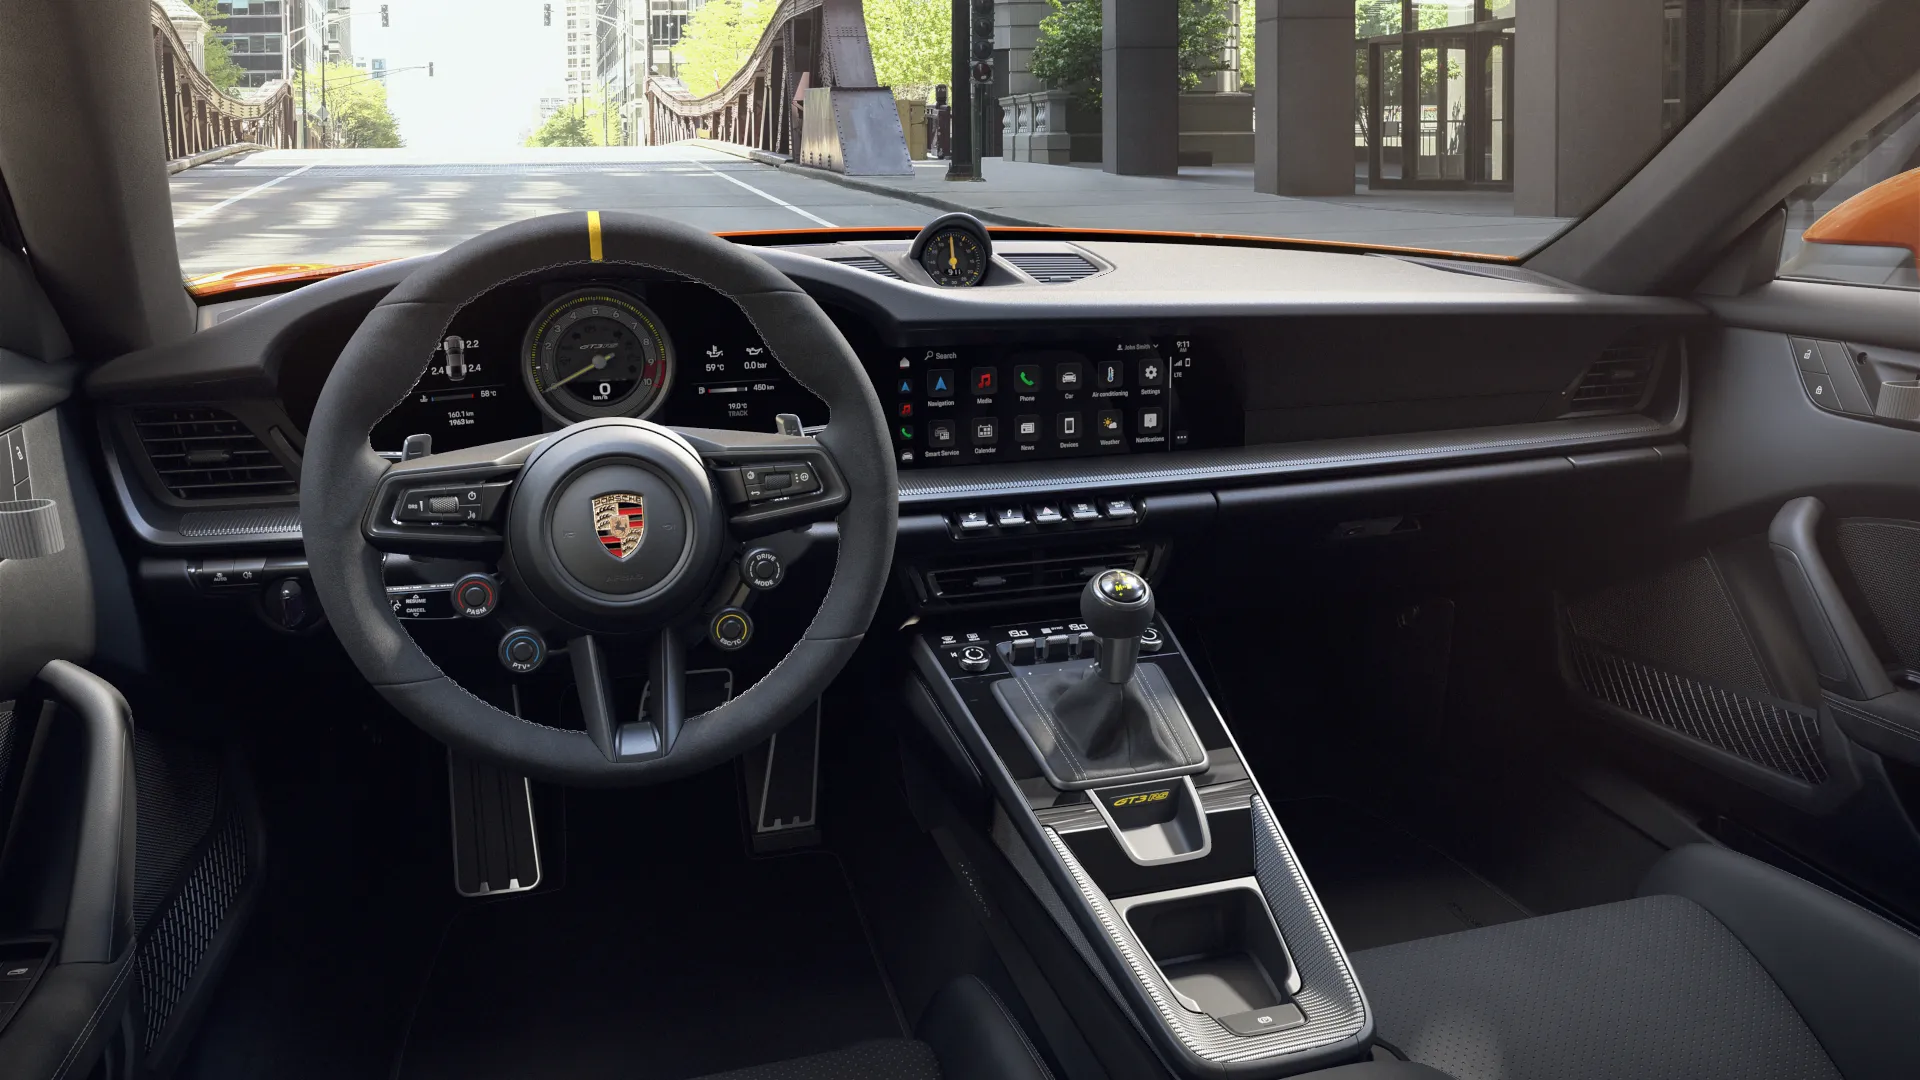 Interior view of 911 GT3 RS